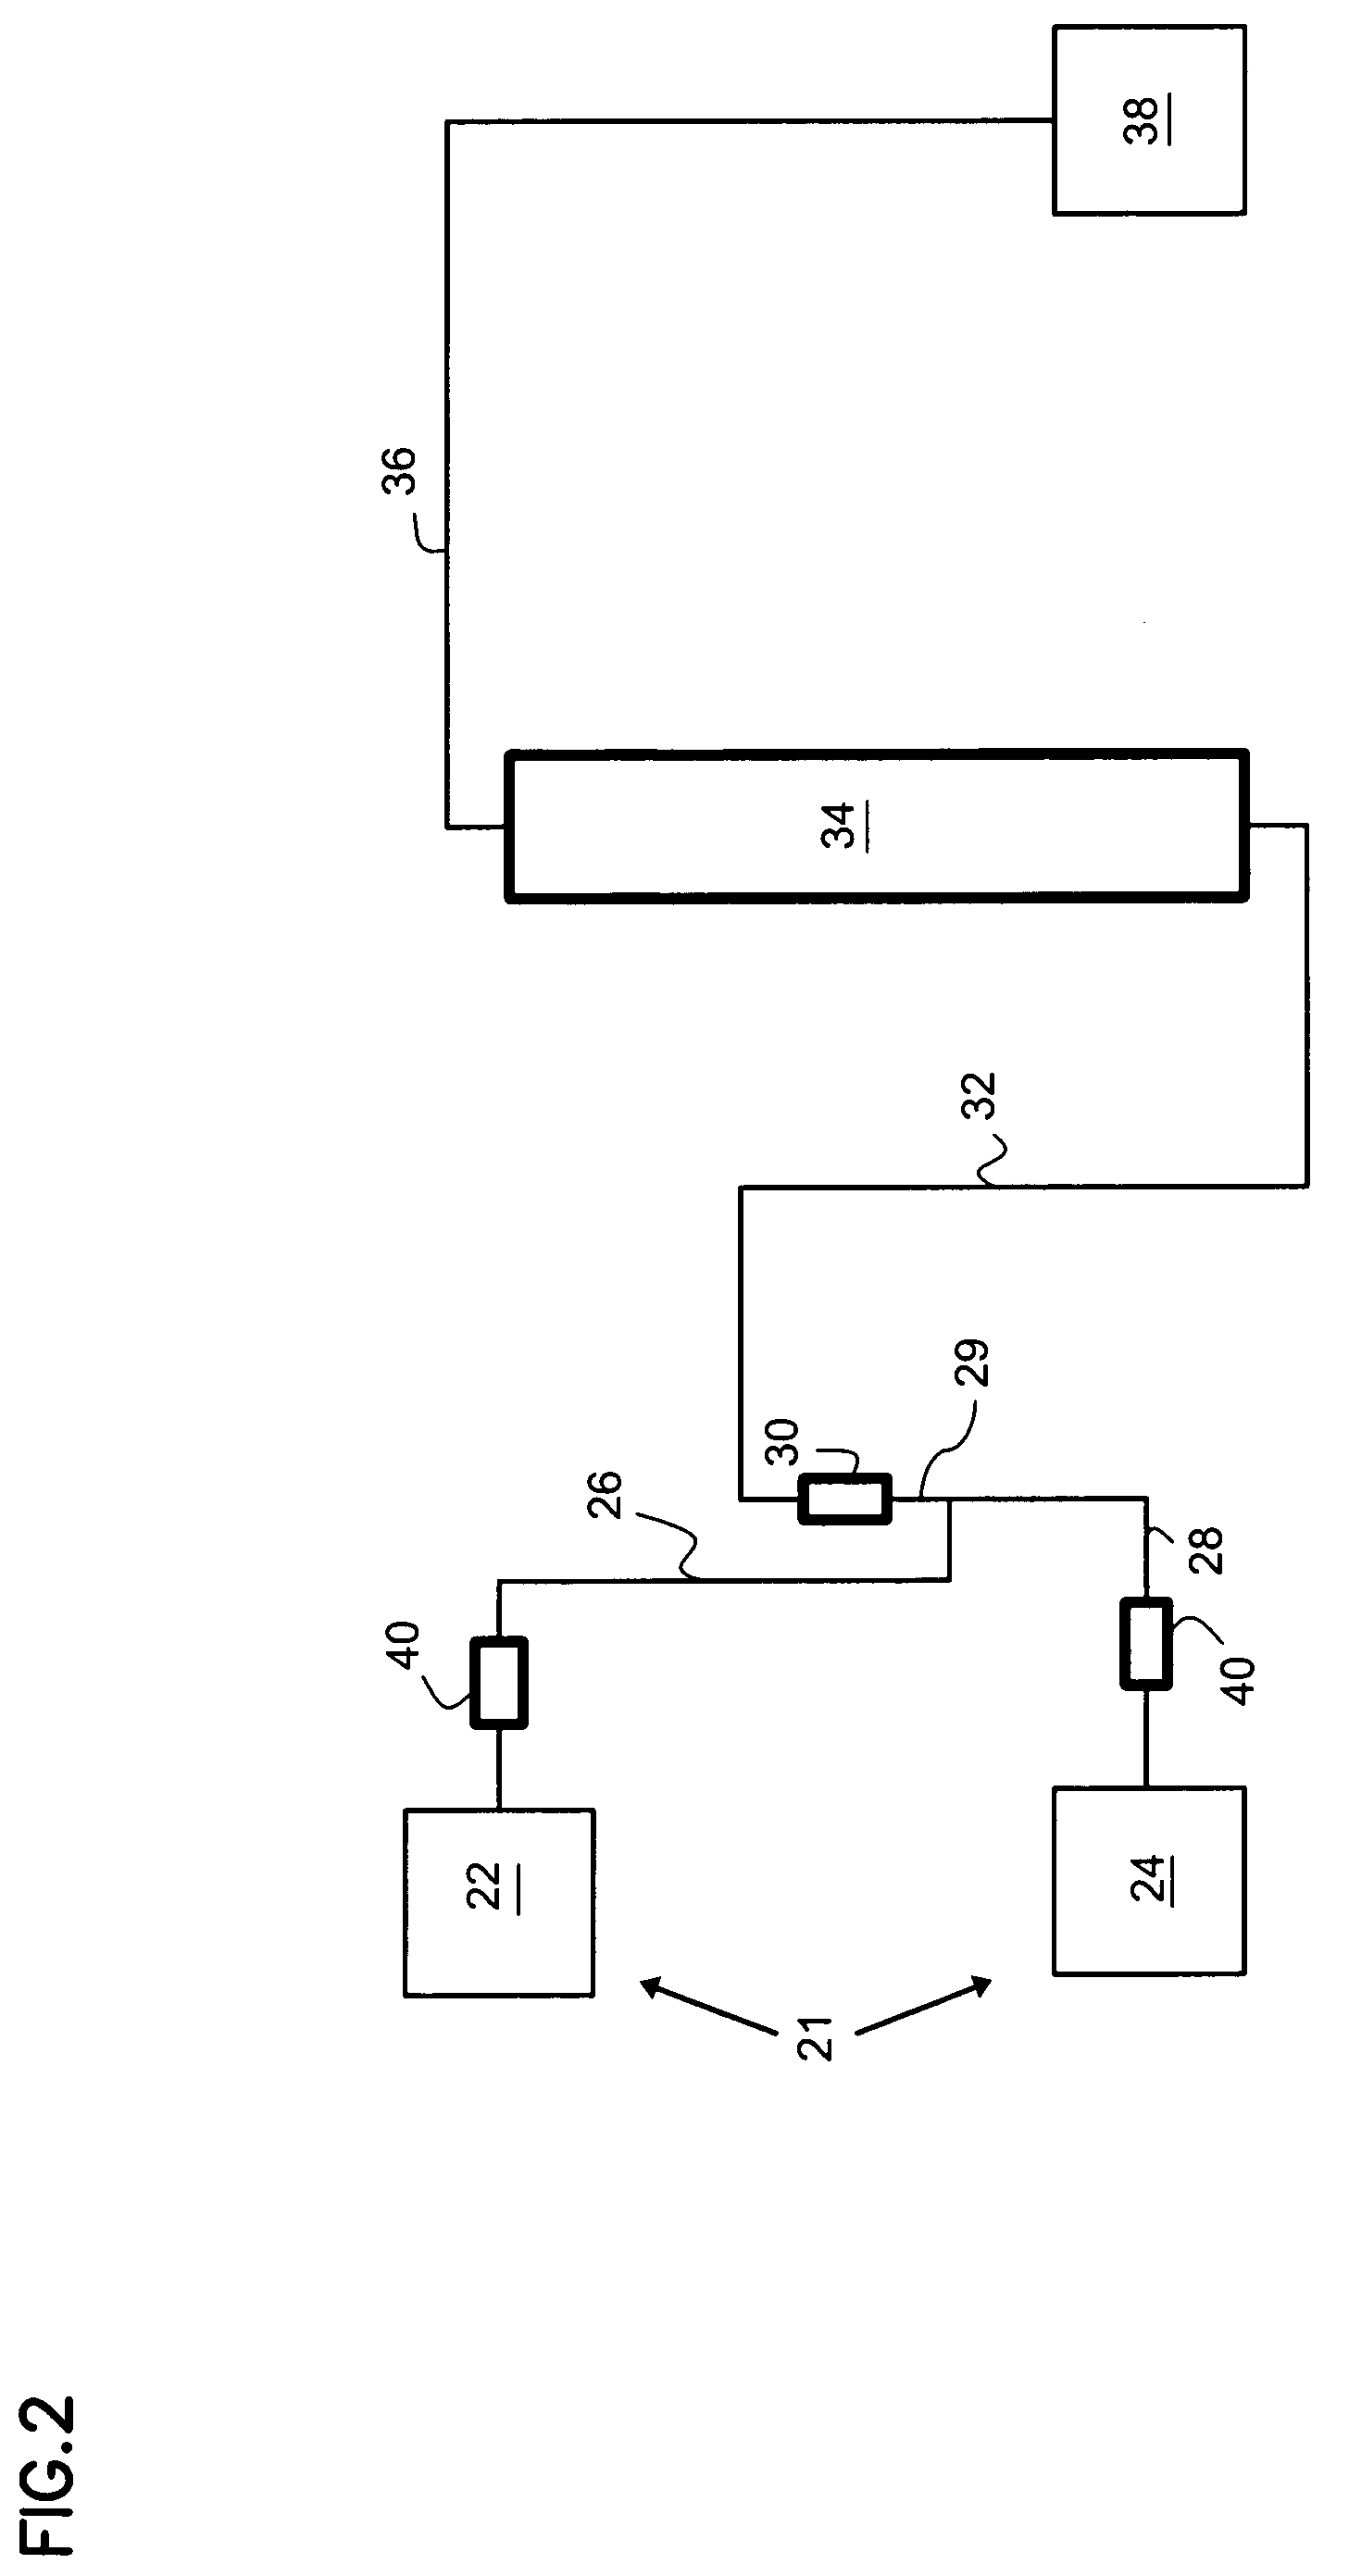 Apparatus and method for making a peroxycarboxylic acid